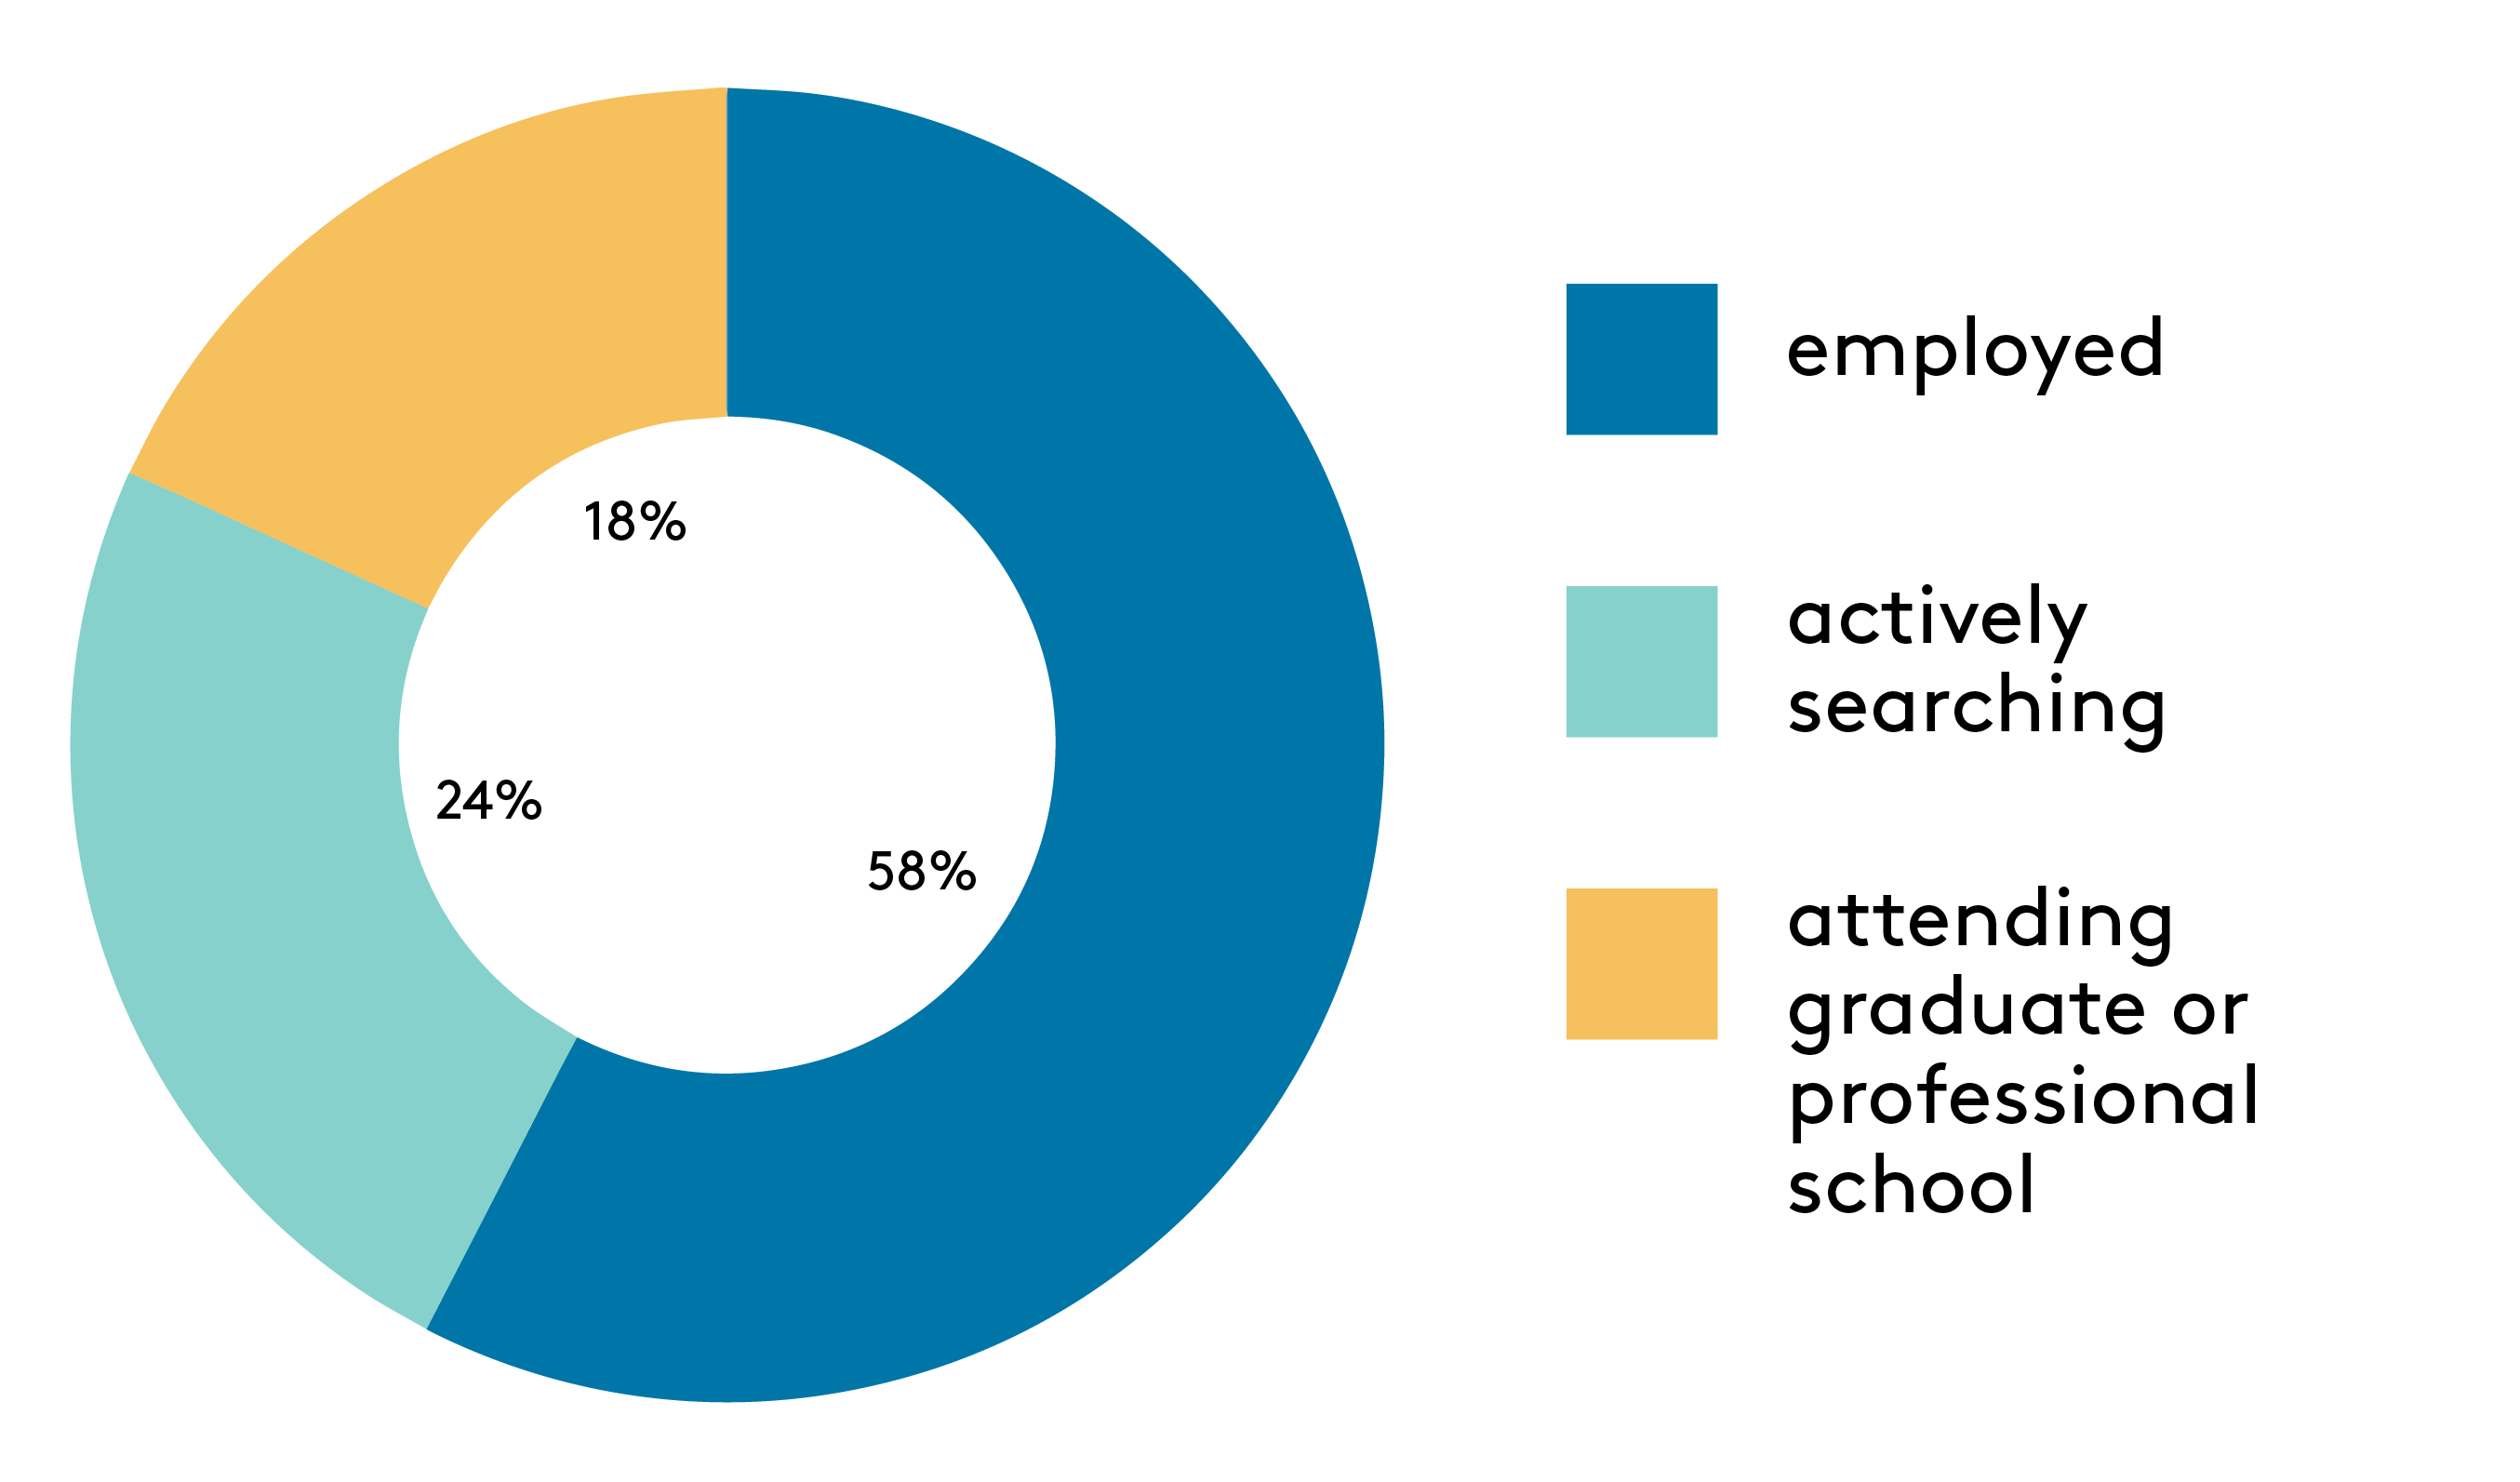 58% employed; 24% actively searching; 18% attending graduate or professional school